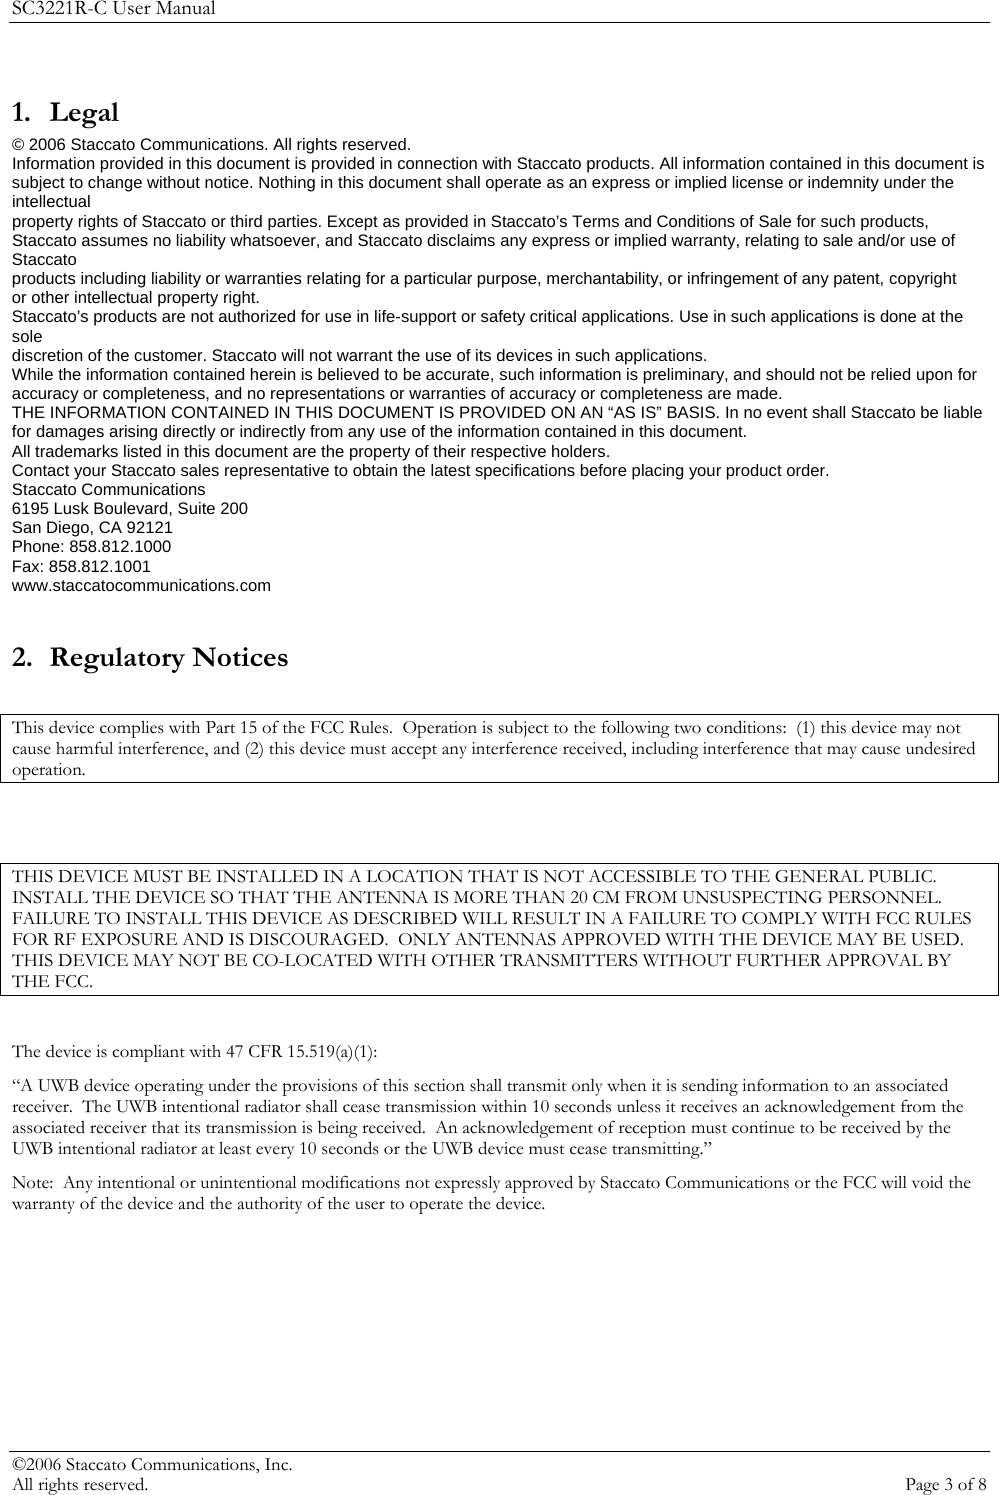 SC3221R-C User Manual 1. Legal © 2006 Staccato Communications. All rights reserved. Information provided in this document is provided in connection with Staccato products. All information contained in this document is subject to change without notice. Nothing in this document shall operate as an express or implied license or indemnity under the intellectual property rights of Staccato or third parties. Except as provided in Staccato’s Terms and Conditions of Sale for such products, Staccato assumes no liability whatsoever, and Staccato disclaims any express or implied warranty, relating to sale and/or use of Staccato products including liability or warranties relating for a particular purpose, merchantability, or infringement of any patent, copyright or other intellectual property right. Staccato’s products are not authorized for use in life-support or safety critical applications. Use in such applications is done at the sole discretion of the customer. Staccato will not warrant the use of its devices in such applications. While the information contained herein is believed to be accurate, such information is preliminary, and should not be relied upon for accuracy or completeness, and no representations or warranties of accuracy or completeness are made. THE INFORMATION CONTAINED IN THIS DOCUMENT IS PROVIDED ON AN “AS IS” BASIS. In no event shall Staccato be liable for damages arising directly or indirectly from any use of the information contained in this document. All trademarks listed in this document are the property of their respective holders. Contact your Staccato sales representative to obtain the latest specifications before placing your product order. Staccato Communications 6195 Lusk Boulevard, Suite 200 San Diego, CA 92121 Phone: 858.812.1000 Fax: 858.812.1001 www.staccatocommunications.com  2. Regulatory Notices  This device complies with Part 15 of the FCC Rules.  Operation is subject to the following two conditions:  (1) this device may not cause harmful interference, and (2) this device must accept any interference received, including interference that may cause undesired operation.   THIS DEVICE MUST BE INSTALLED IN A LOCATION THAT IS NOT ACCESSIBLE TO THE GENERAL PUBLIC.  INSTALL THE DEVICE SO THAT THE ANTENNA IS MORE THAN 20 CM FROM UNSUSPECTING PERSONNEL.  FAILURE TO INSTALL THIS DEVICE AS DESCRIBED WILL RESULT IN A FAILURE TO COMPLY WITH FCC RULES FOR RF EXPOSURE AND IS DISCOURAGED.  ONLY ANTENNAS APPROVED WITH THE DEVICE MAY BE USED.  THIS DEVICE MAY NOT BE CO-LOCATED WITH OTHER TRANSMITTERS WITHOUT FURTHER APPROVAL BY THE FCC.  The device is compliant with 47 CFR 15.519(a)(1): “A UWB device operating under the provisions of this section shall transmit only when it is sending information to an associated receiver.  The UWB intentional radiator shall cease transmission within 10 seconds unless it receives an acknowledgement from the associated receiver that its transmission is being received.  An acknowledgement of reception must continue to be received by the UWB intentional radiator at least every 10 seconds or the UWB device must cease transmitting.” Note:  Any intentional or unintentional modifications not expressly approved by Staccato Communications or the FCC will void the warranty of the device and the authority of the user to operate the device. ©2006 Staccato Communications, Inc.   All rights reserved.  Page 3 of 8 